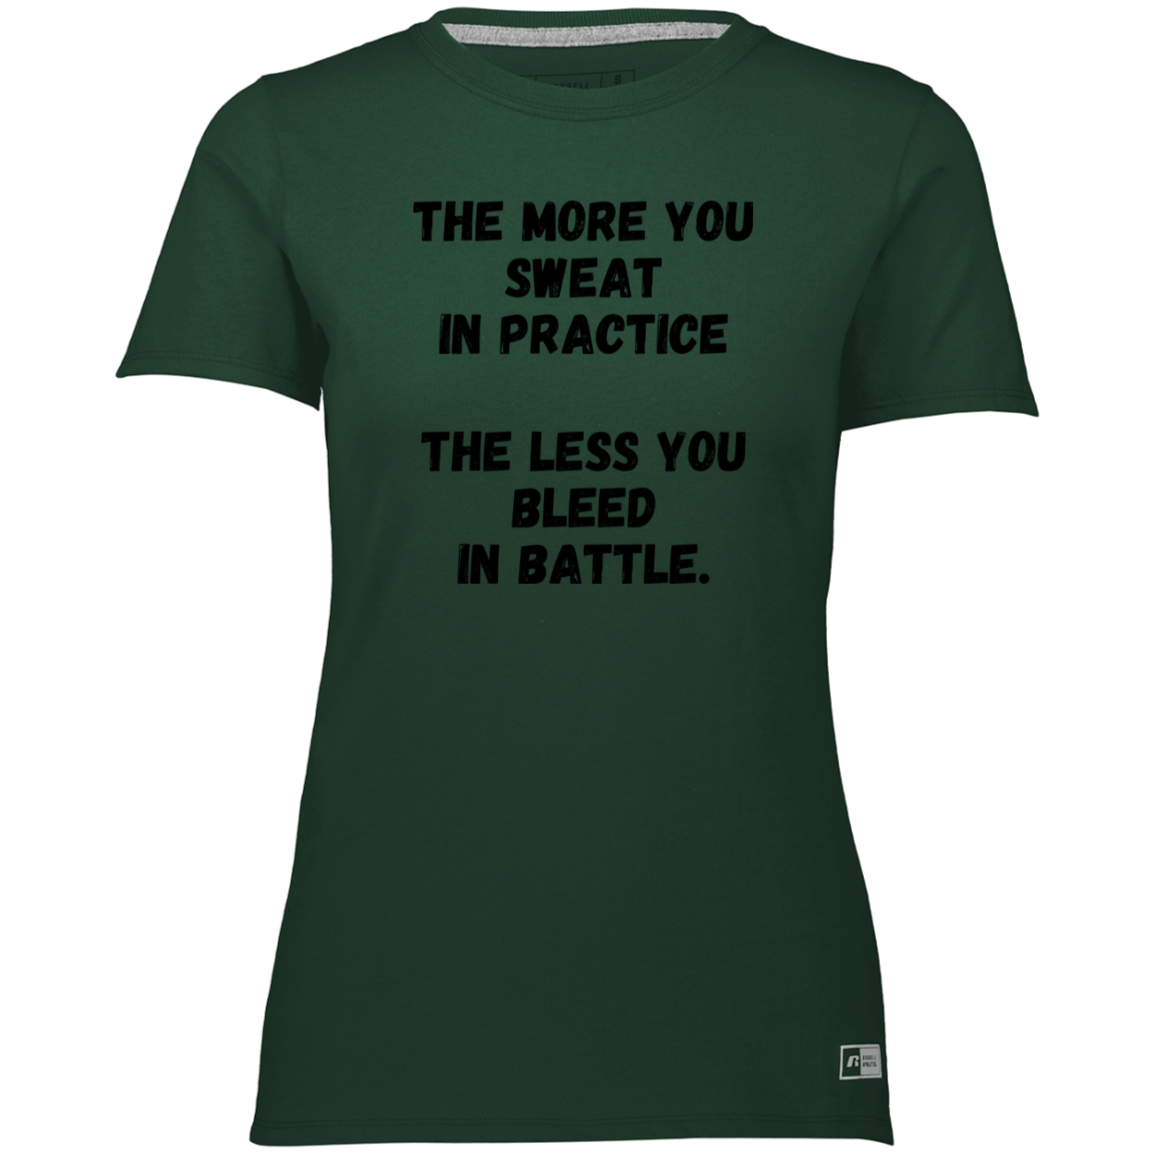 The More You Sweat In Practice, The Less You Bleed In Battle - Women's, Ladies’ Essential Dri-Power Tee / T-Shirt